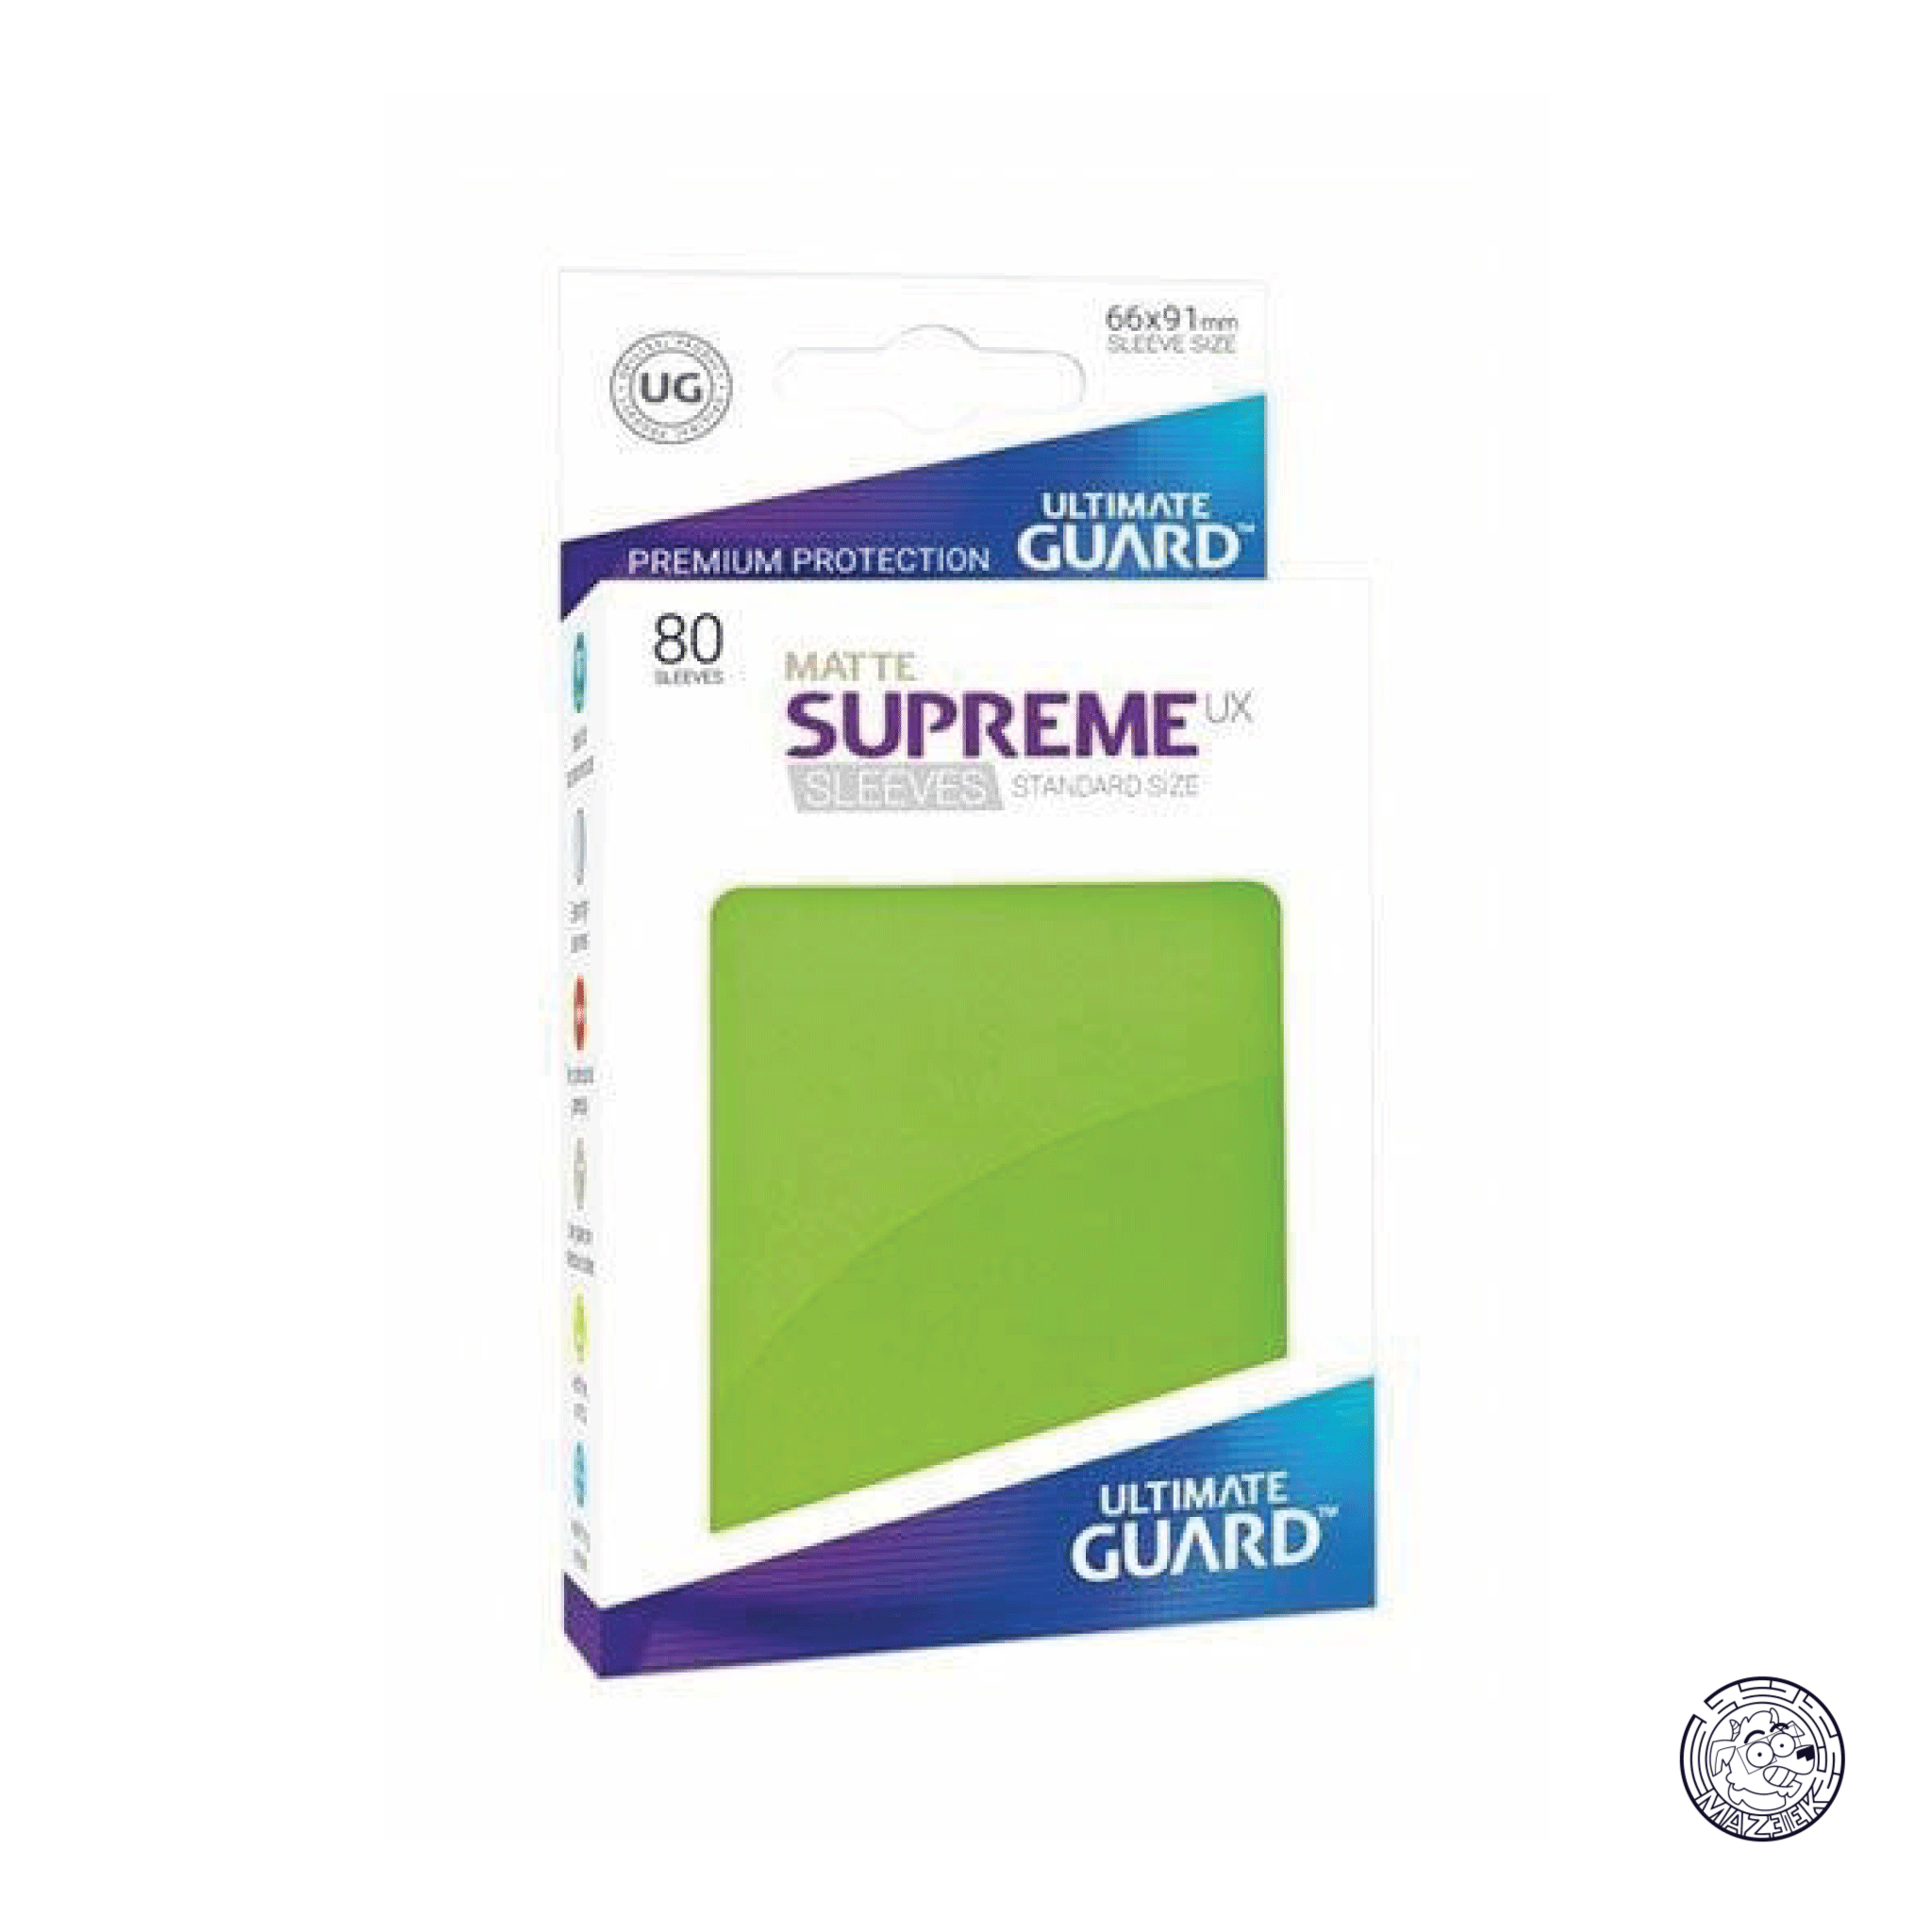 Ultimate Guard - 80 Sleeves Supreme: Standard Size 66x91 mm (Light Green)